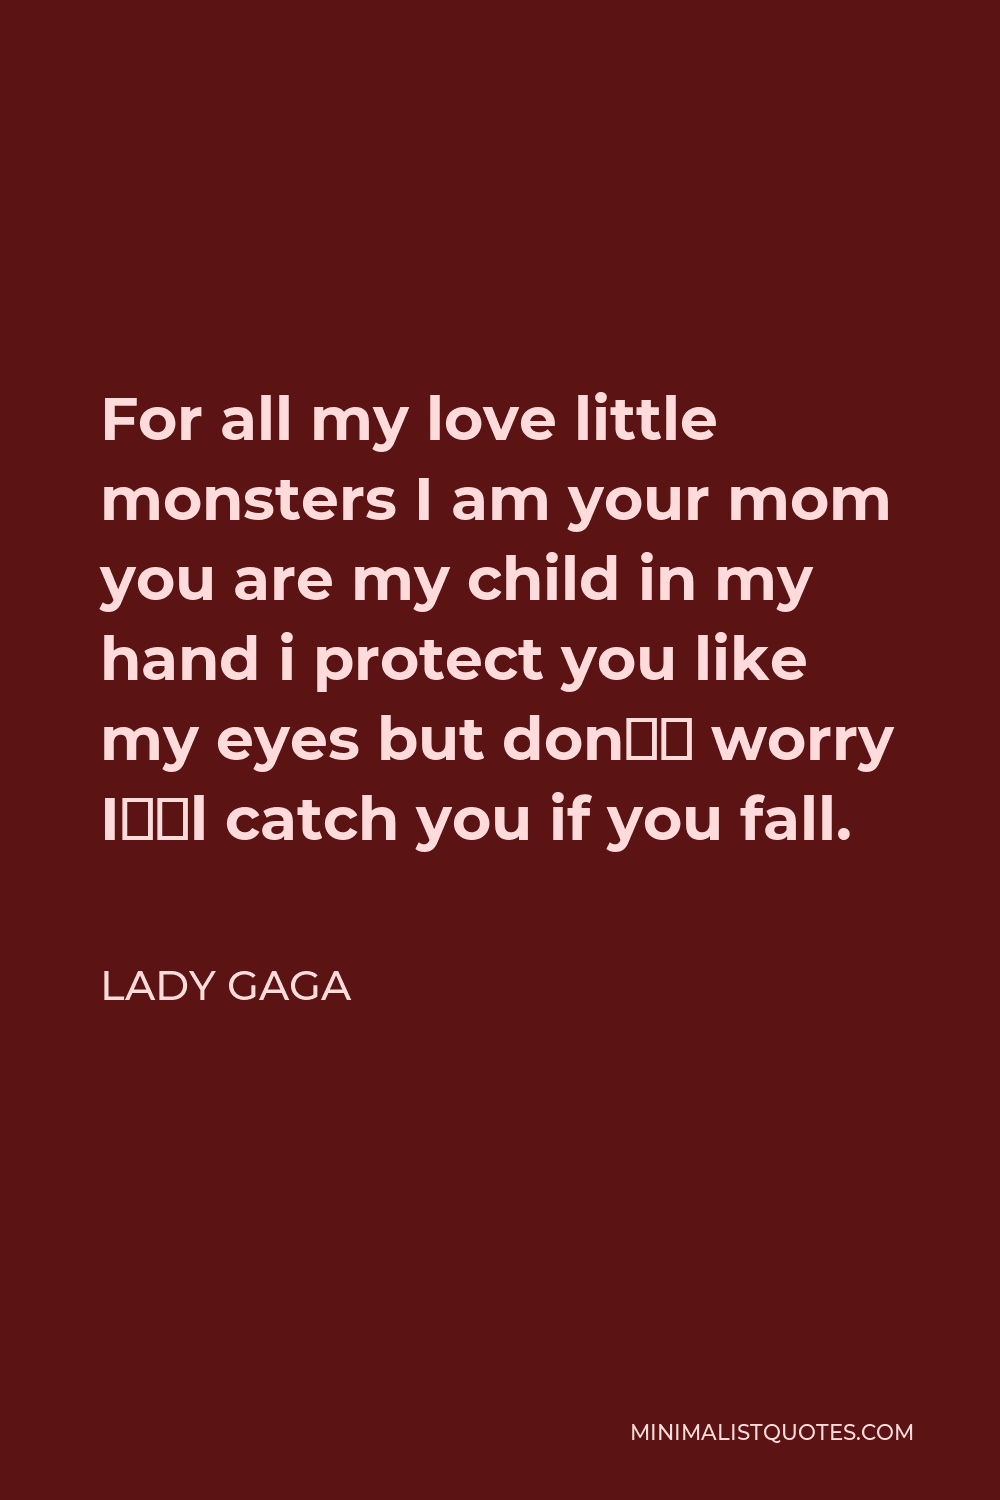 Lady Gaga Quote - For all my love little monsters I am your mom you are my child in my hand i protect you like my eyes but don’t worry I’ll catch you if you fall.